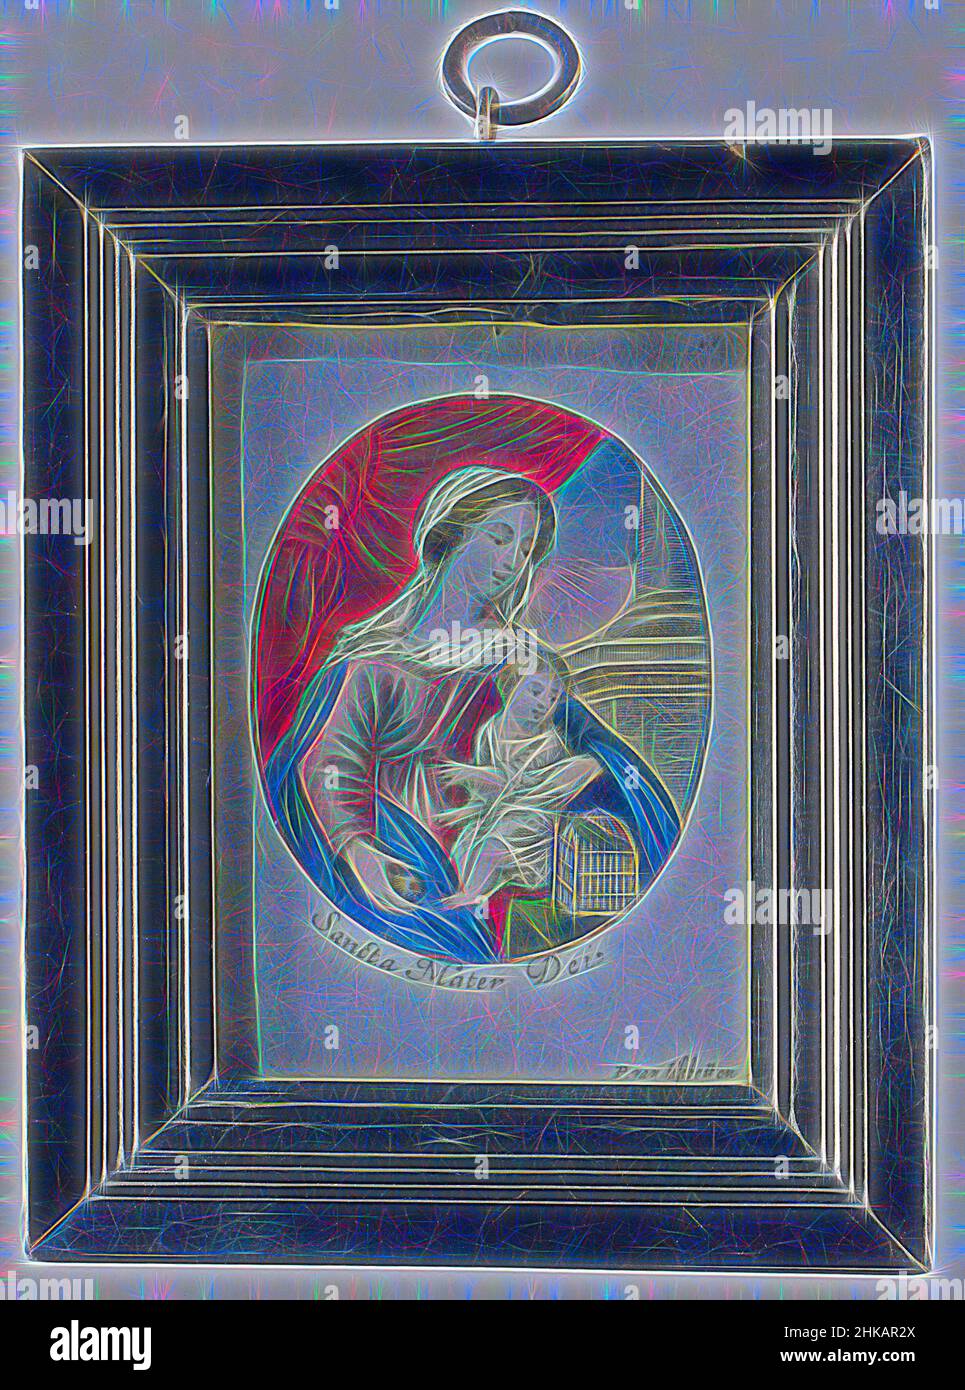 Inspired by Print depicting Mary with child, Print, oval engraving on parchment, colored with gouache and gold paint, depicting Mary with child seated at a table with birdcage. A red curtain in the background on the left, column bases on the right. Enclosed behind glass in a simple profiled frame of, Reimagined by Artotop. Classic art reinvented with a modern twist. Design of warm cheerful glowing of brightness and light ray radiance. Photography inspired by surrealism and futurism, embracing dynamic energy of modern technology, movement, speed and revolutionize culture Stock Photo